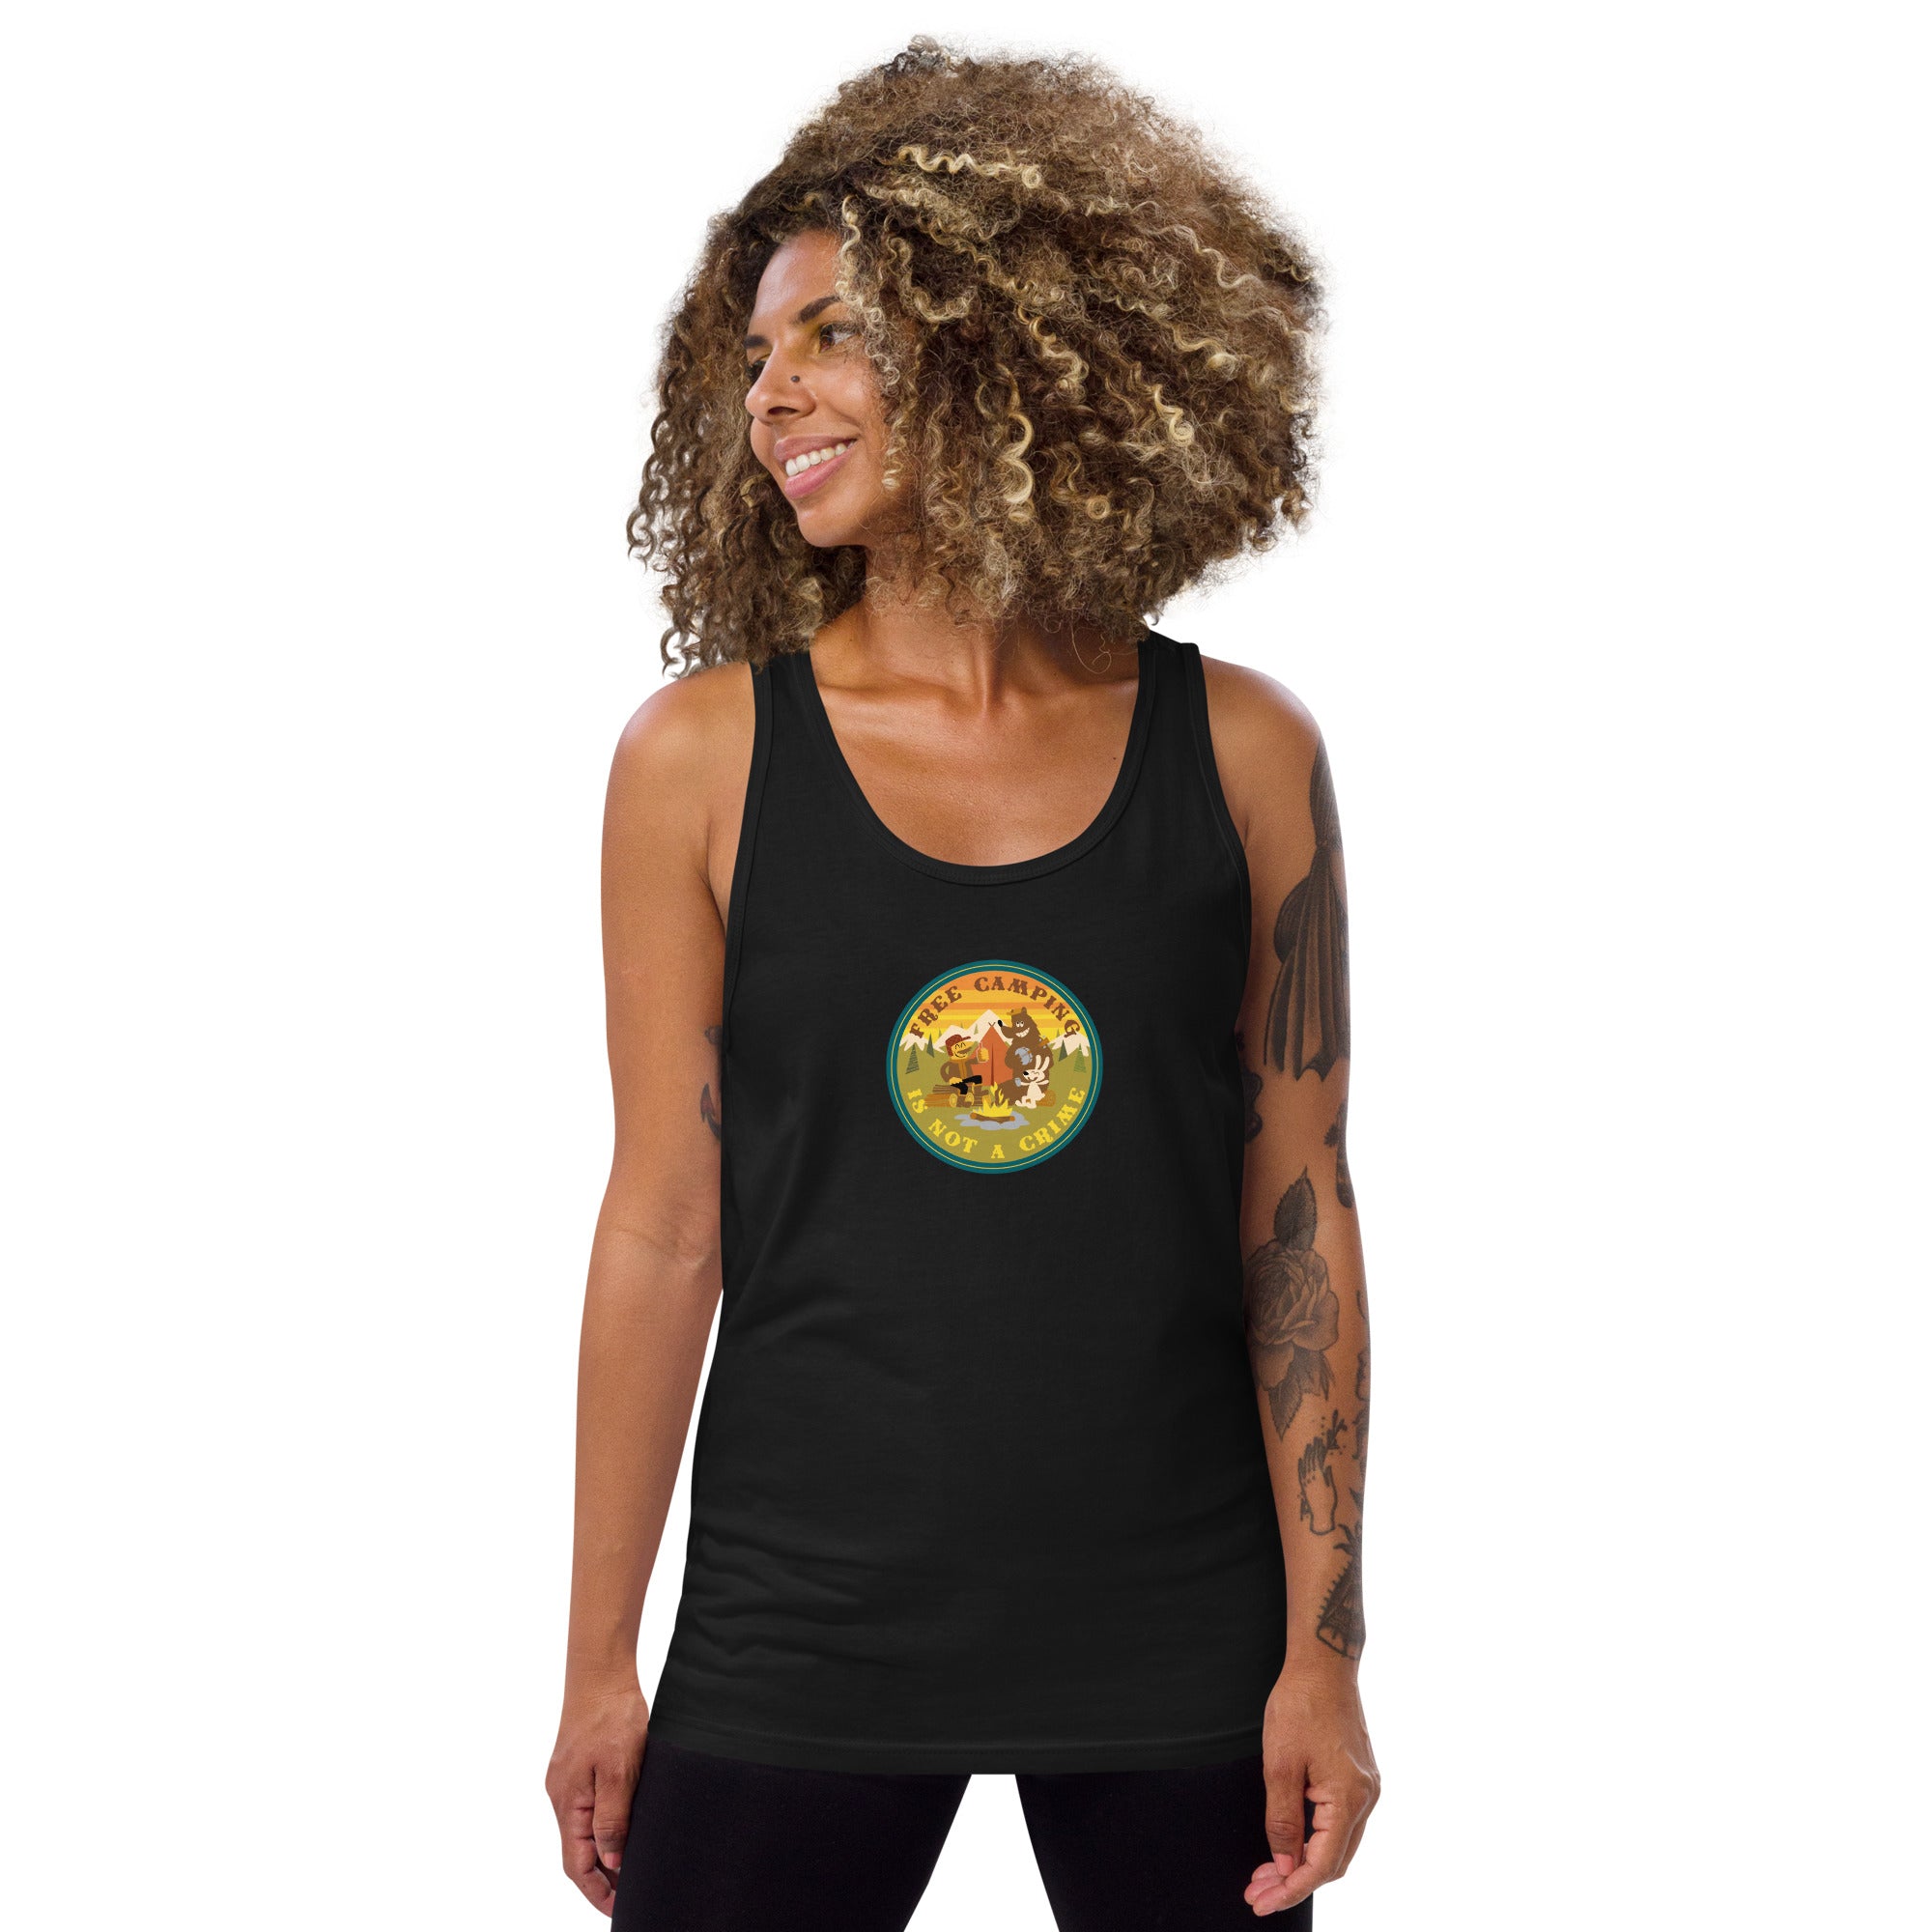 Unisex Tank Top Free camping is not a crime